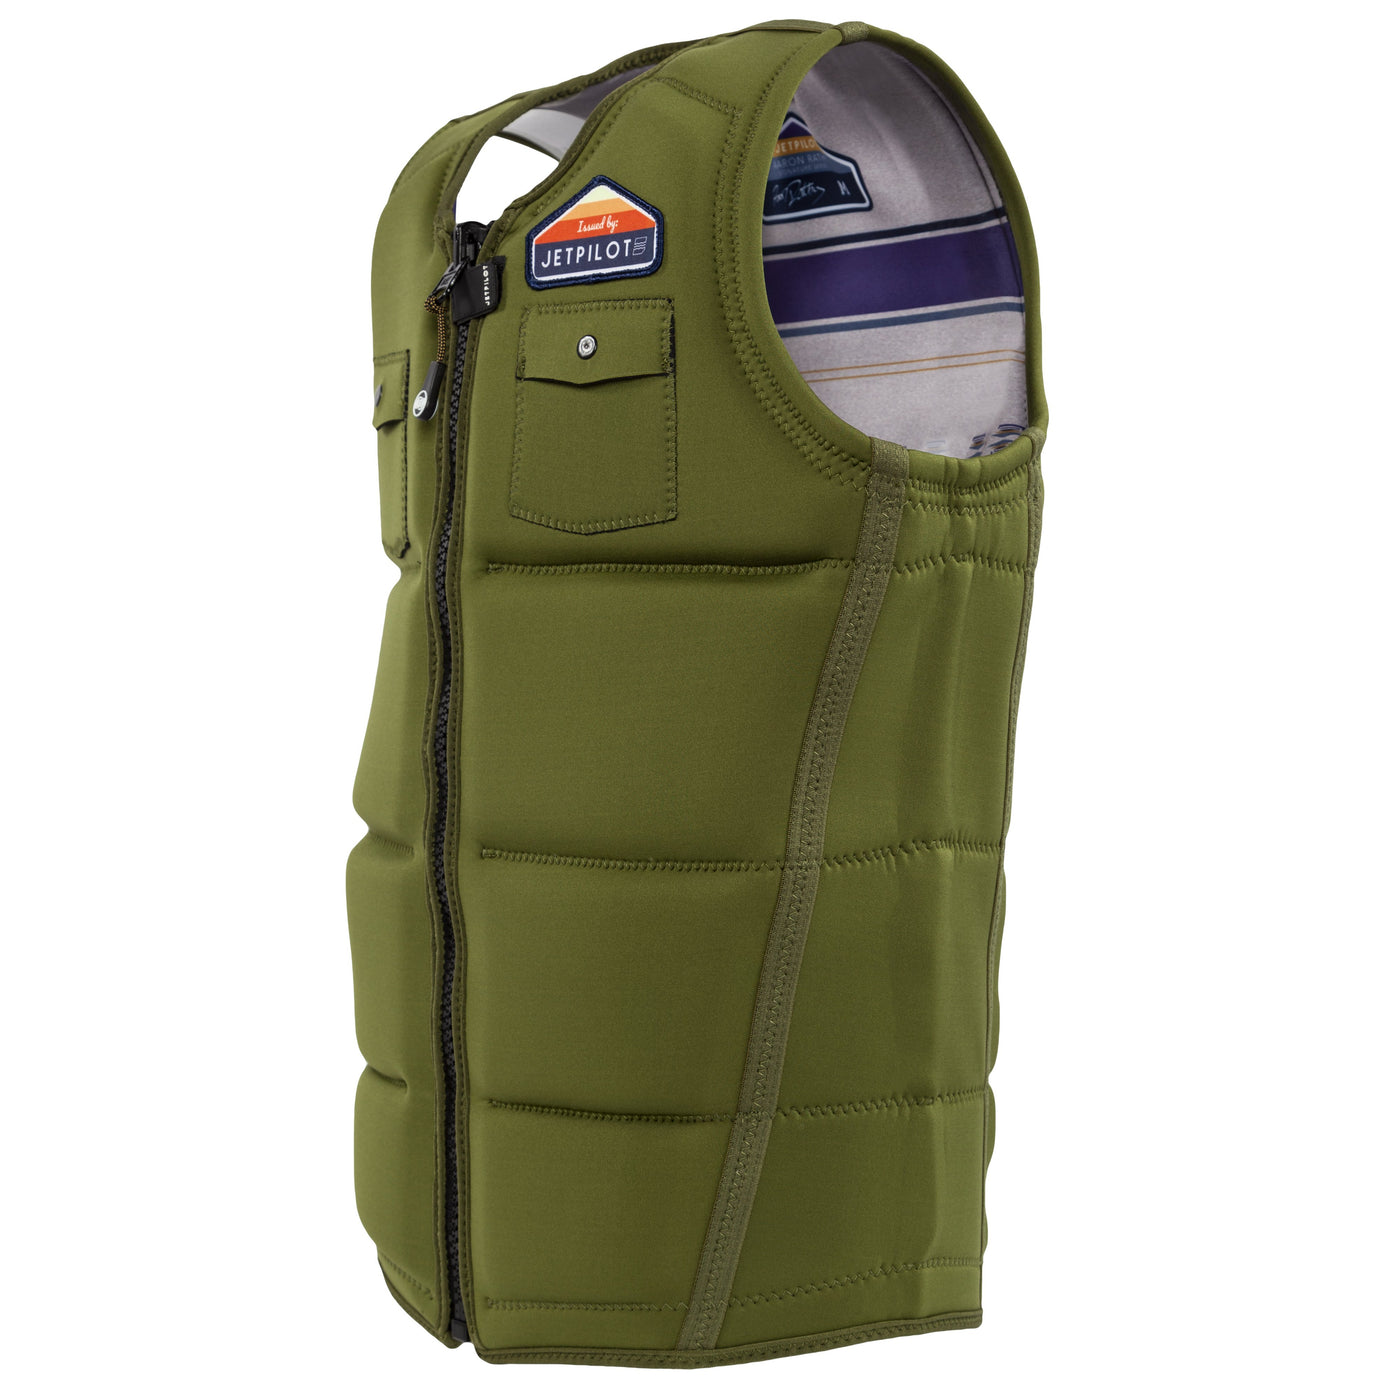 Side view of the Jetpilot's Aaron Rathy Signature Comp Vest Moss colorway side view photo